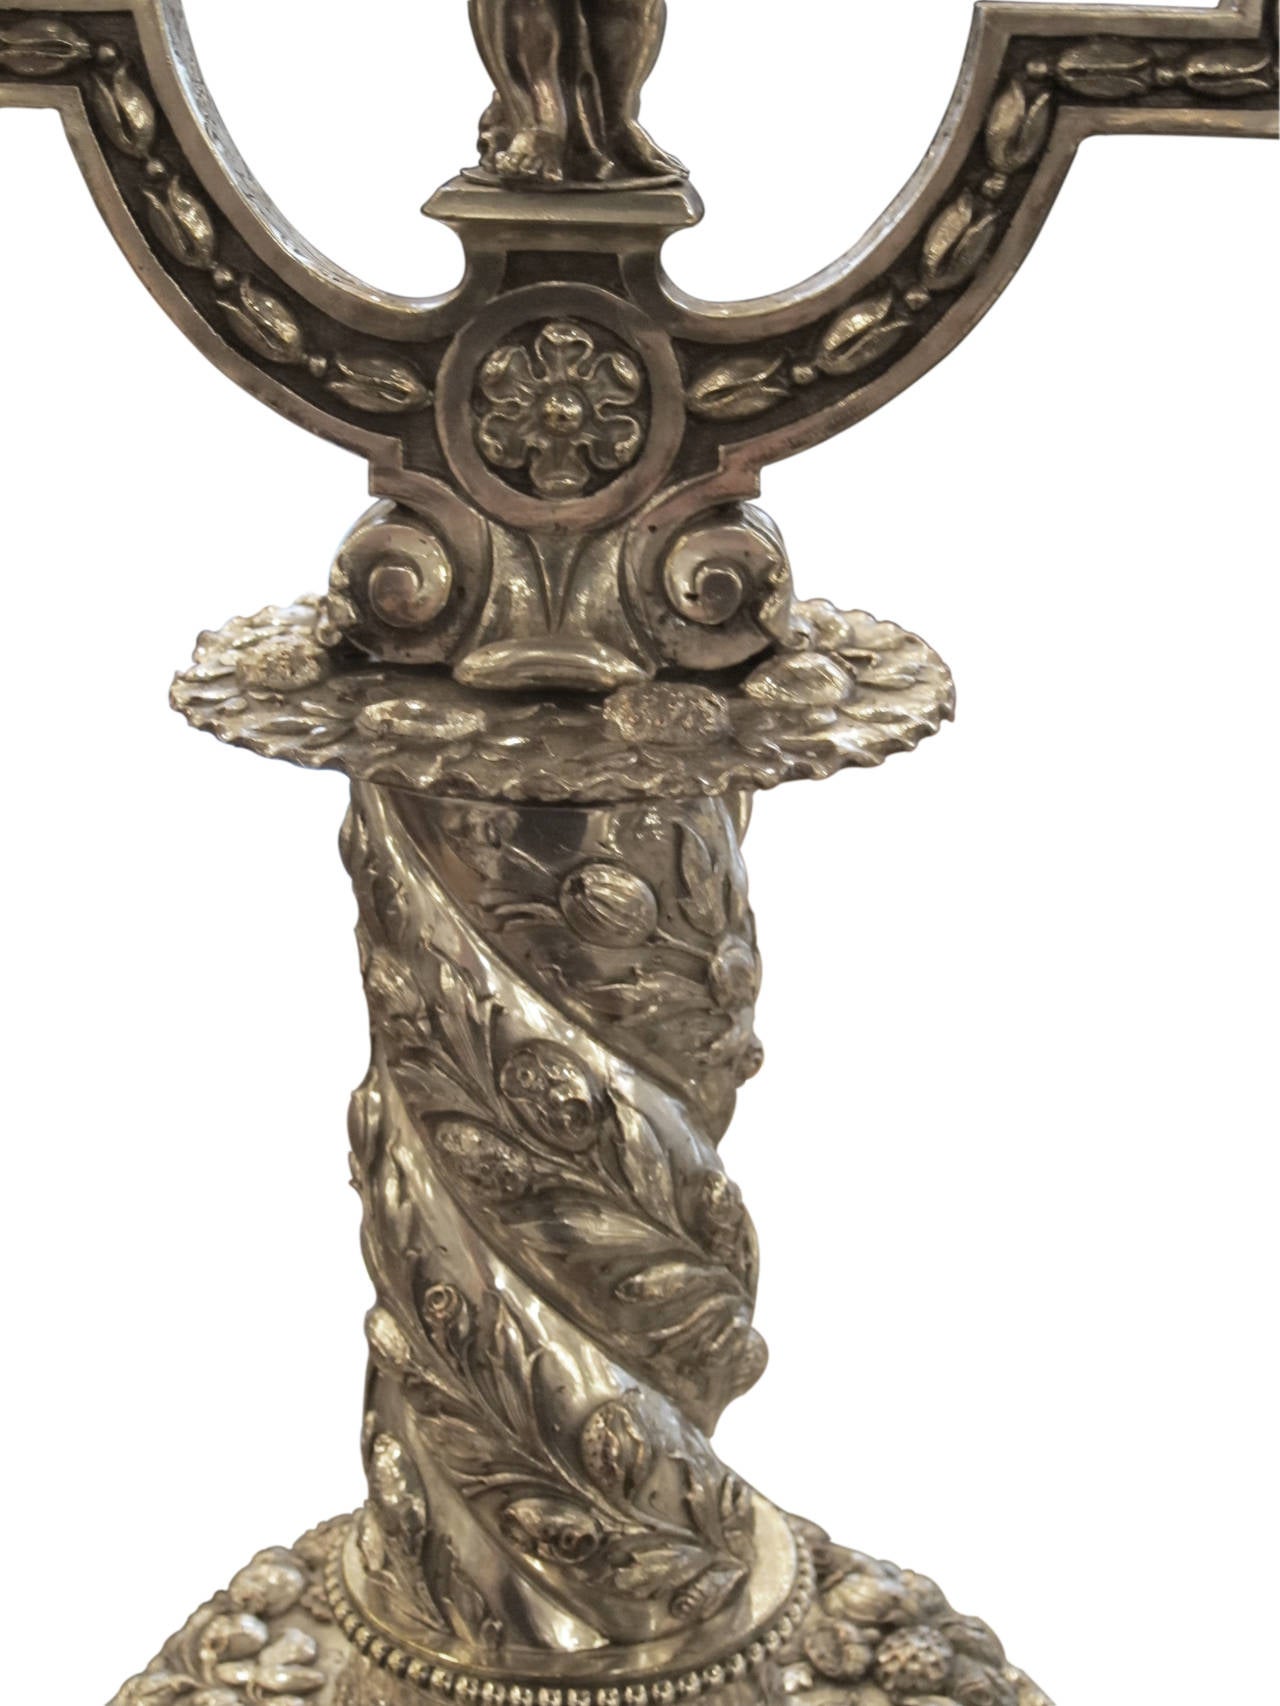 North American Pair of Silvered Bronze Table Candelabrum with Opposing Cherubs by E.F. Caldwell